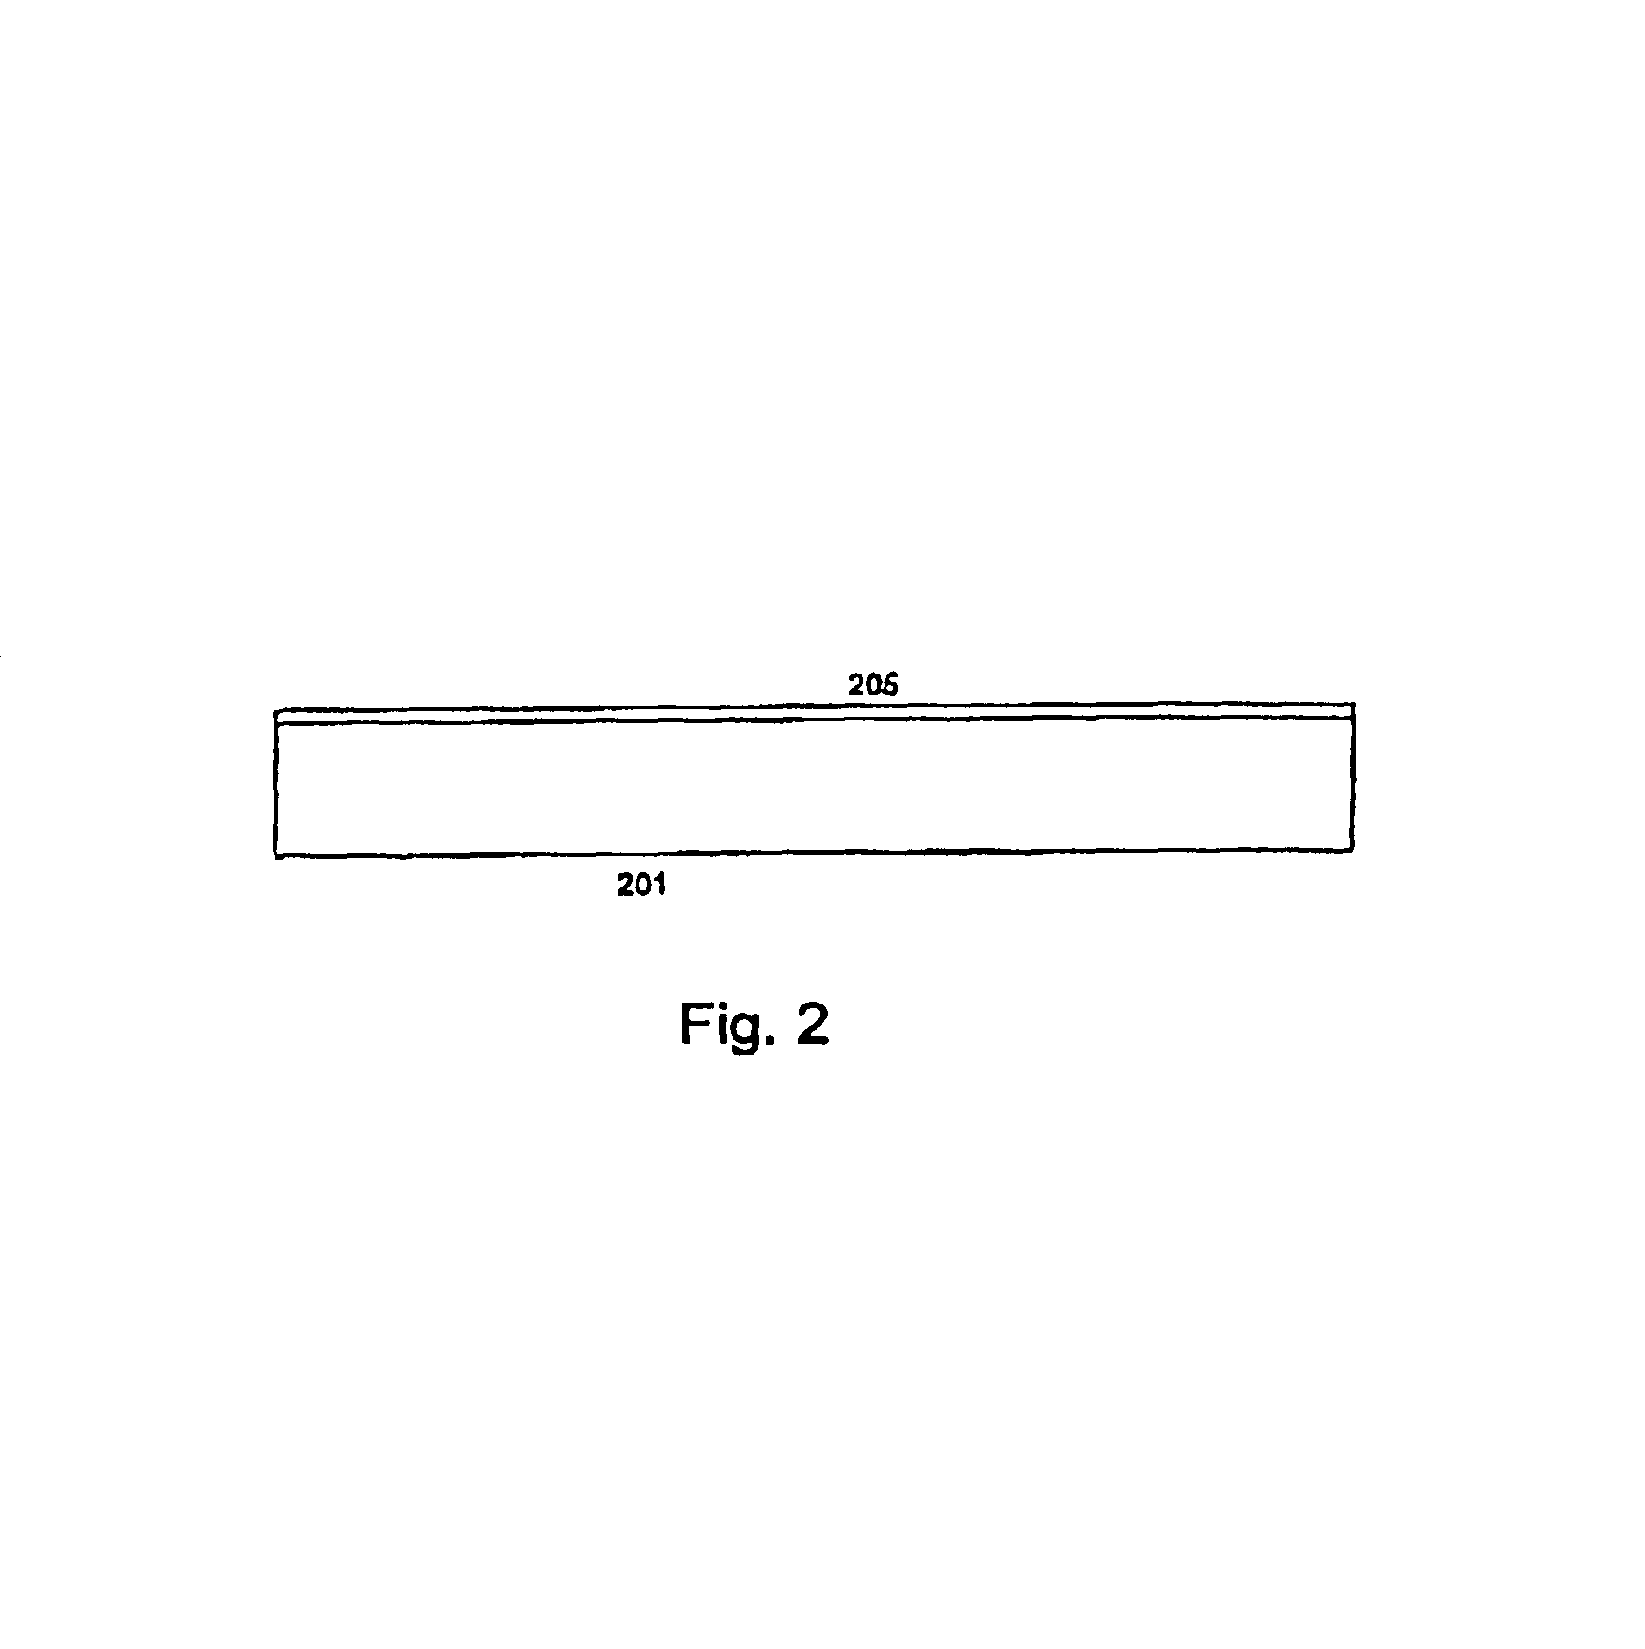 Transparent electrode material for quality enhancement of OLED devices